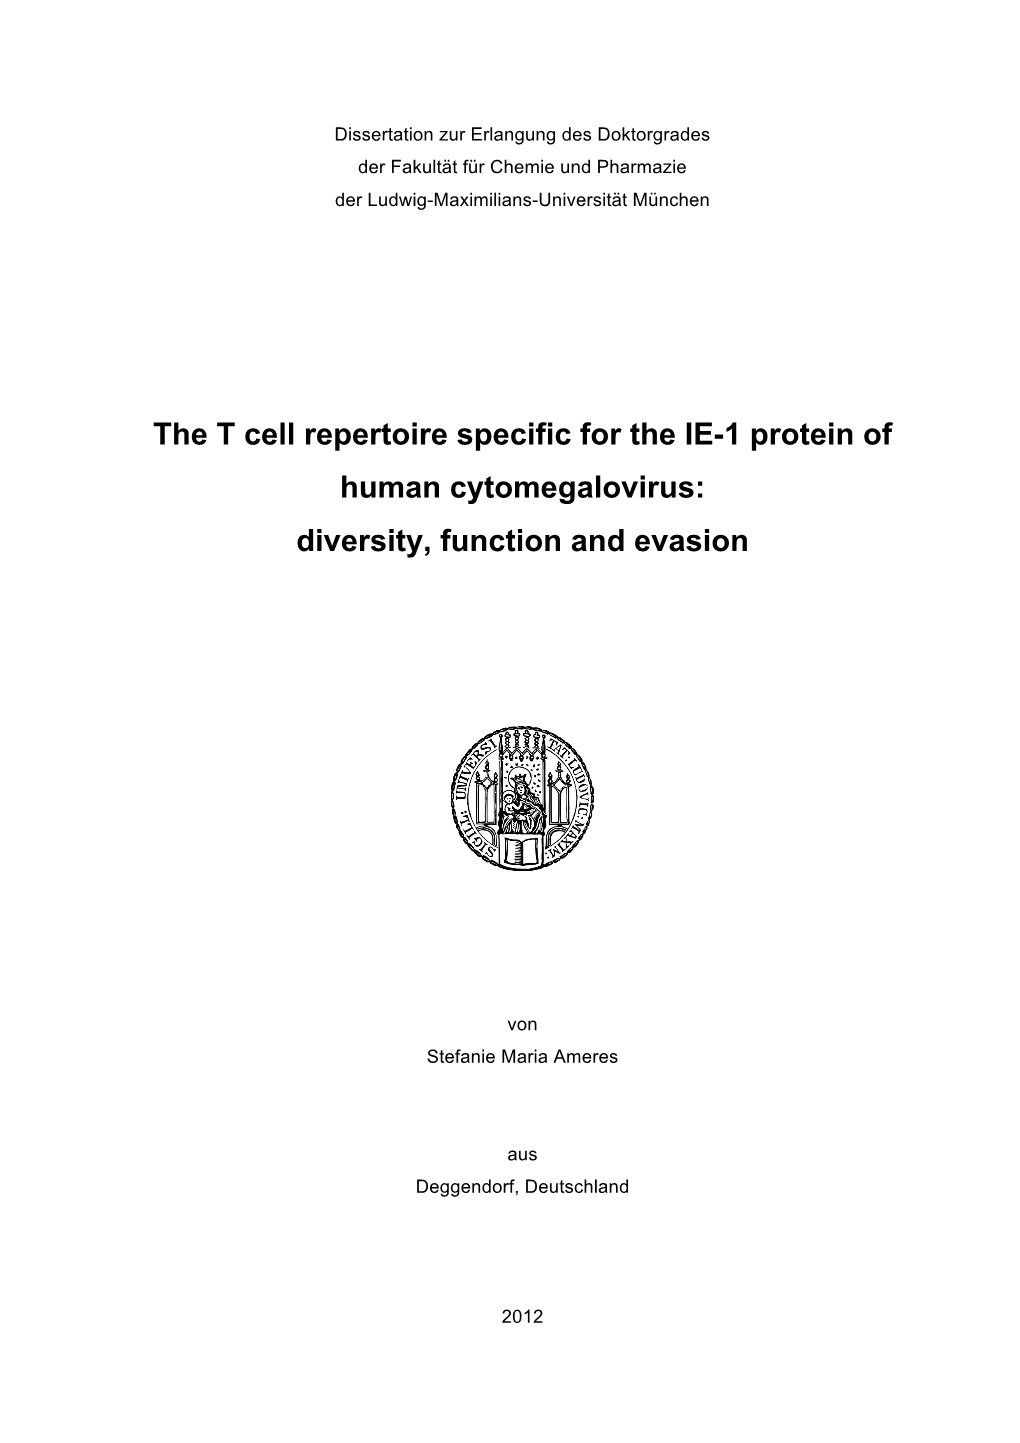 The T Cell Repertoire Specific for the IE-1 Protein of Human Cytomegalovirus: Diversity, Function and Evasion